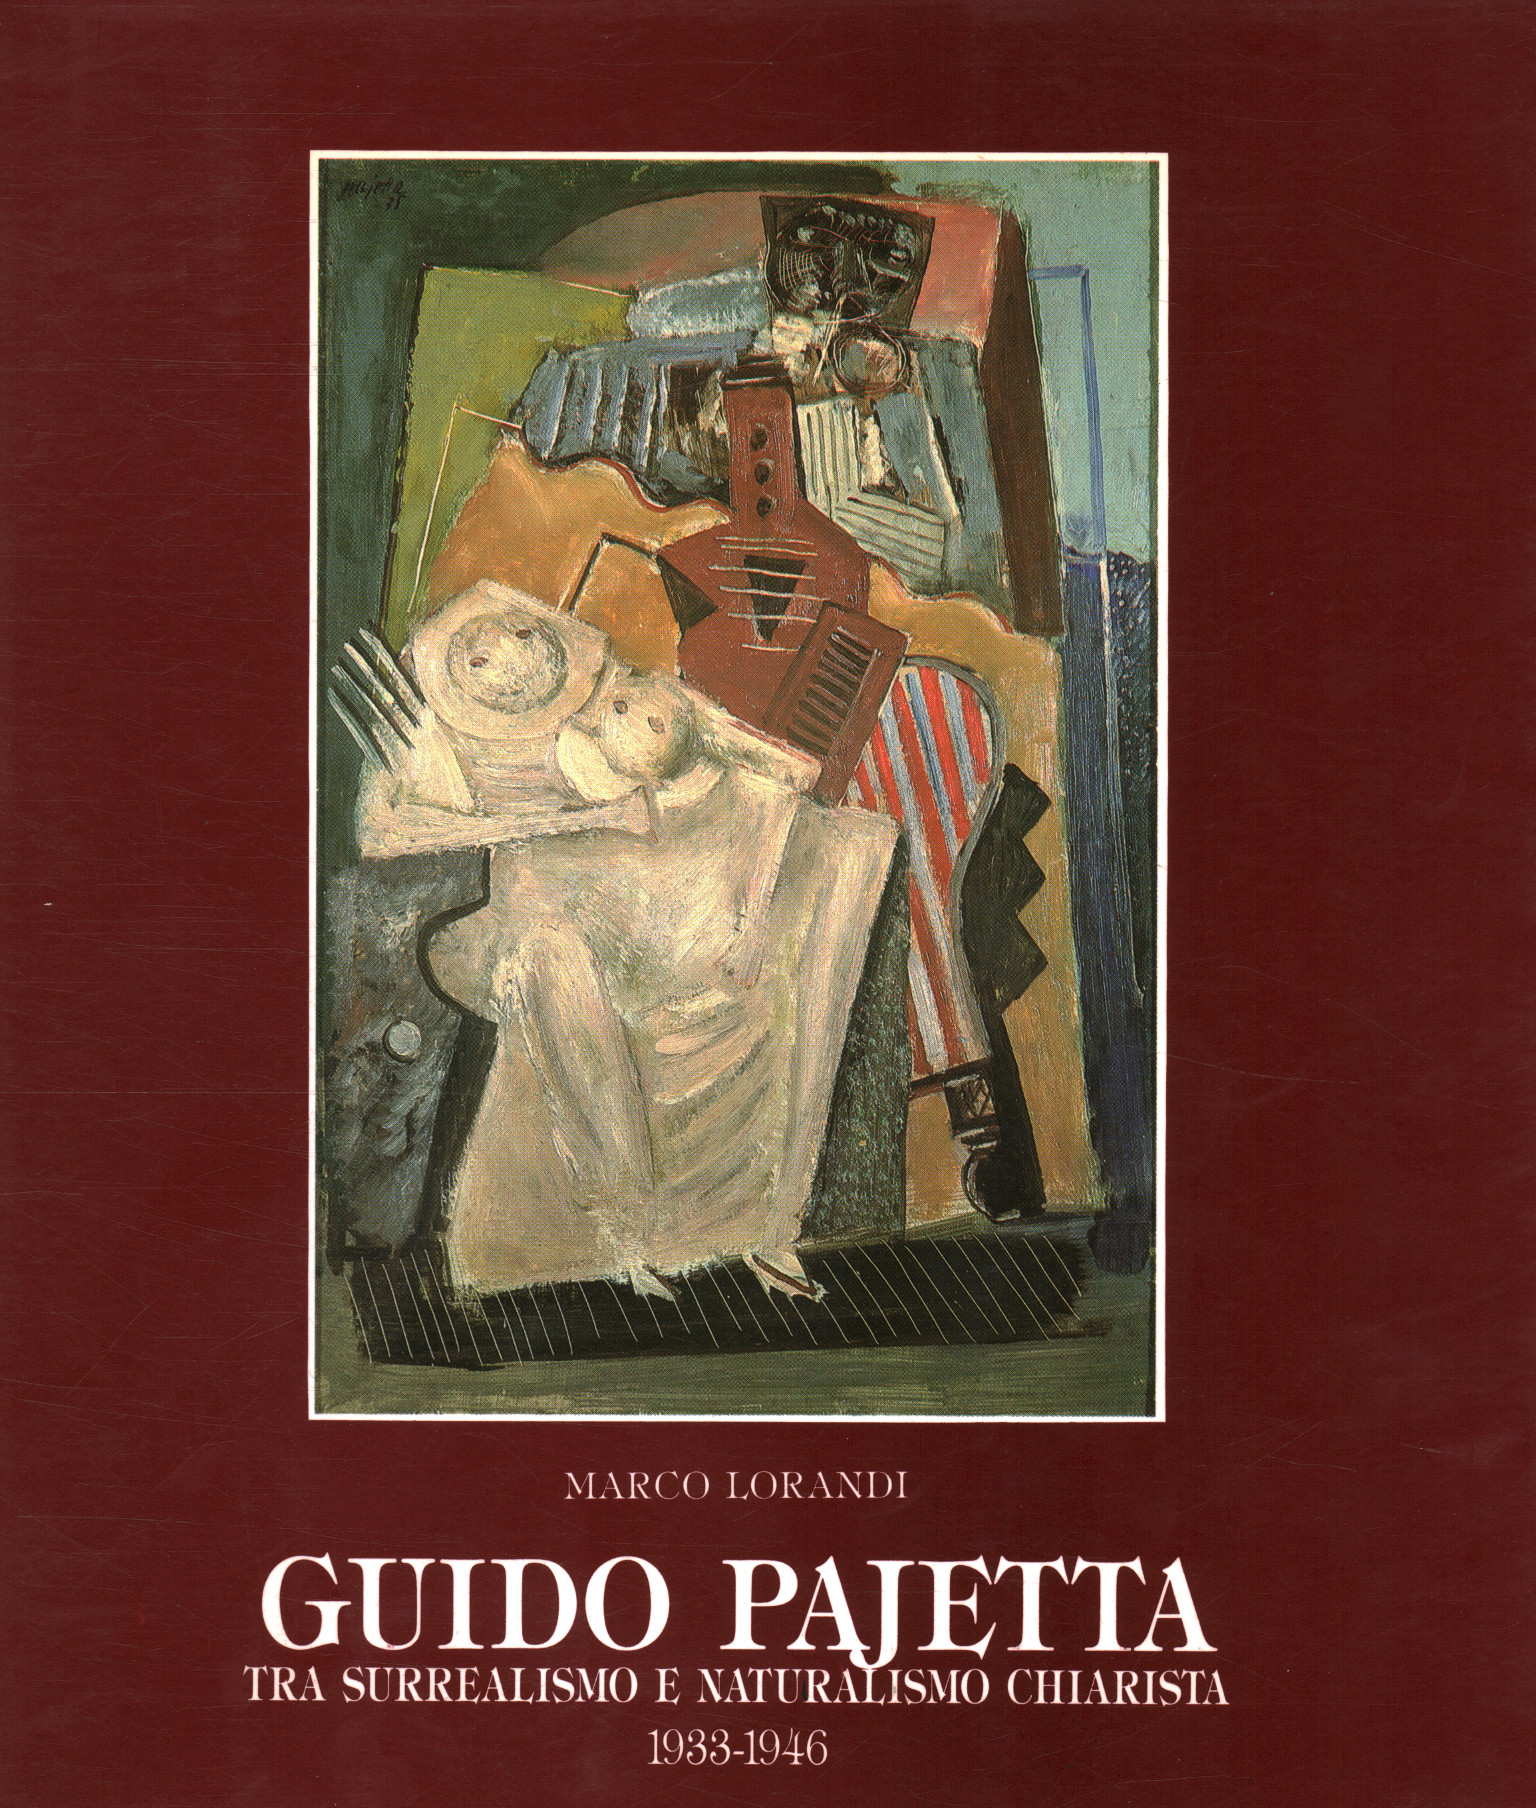 Guido Pajetta. Between surrealism and natural